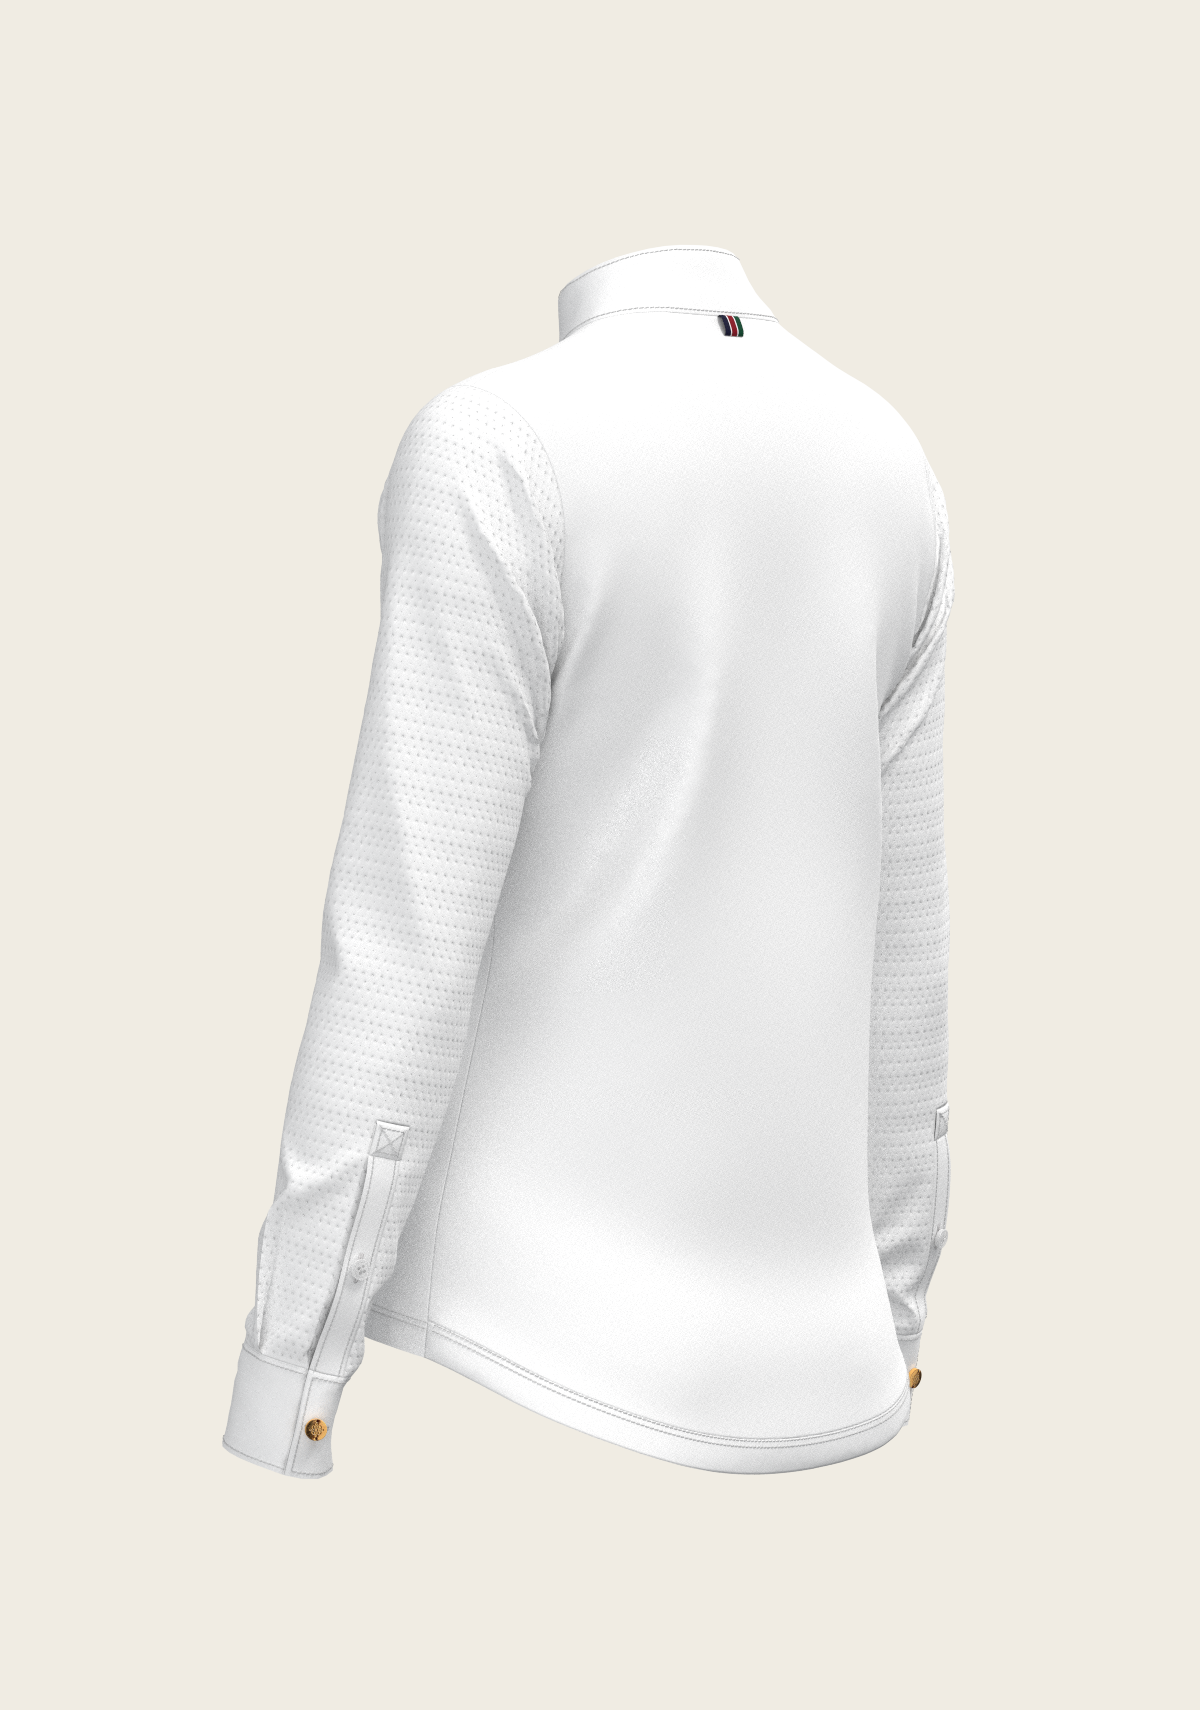  White with Navy Stripes Inner Details Long Sleeve Show Shirt